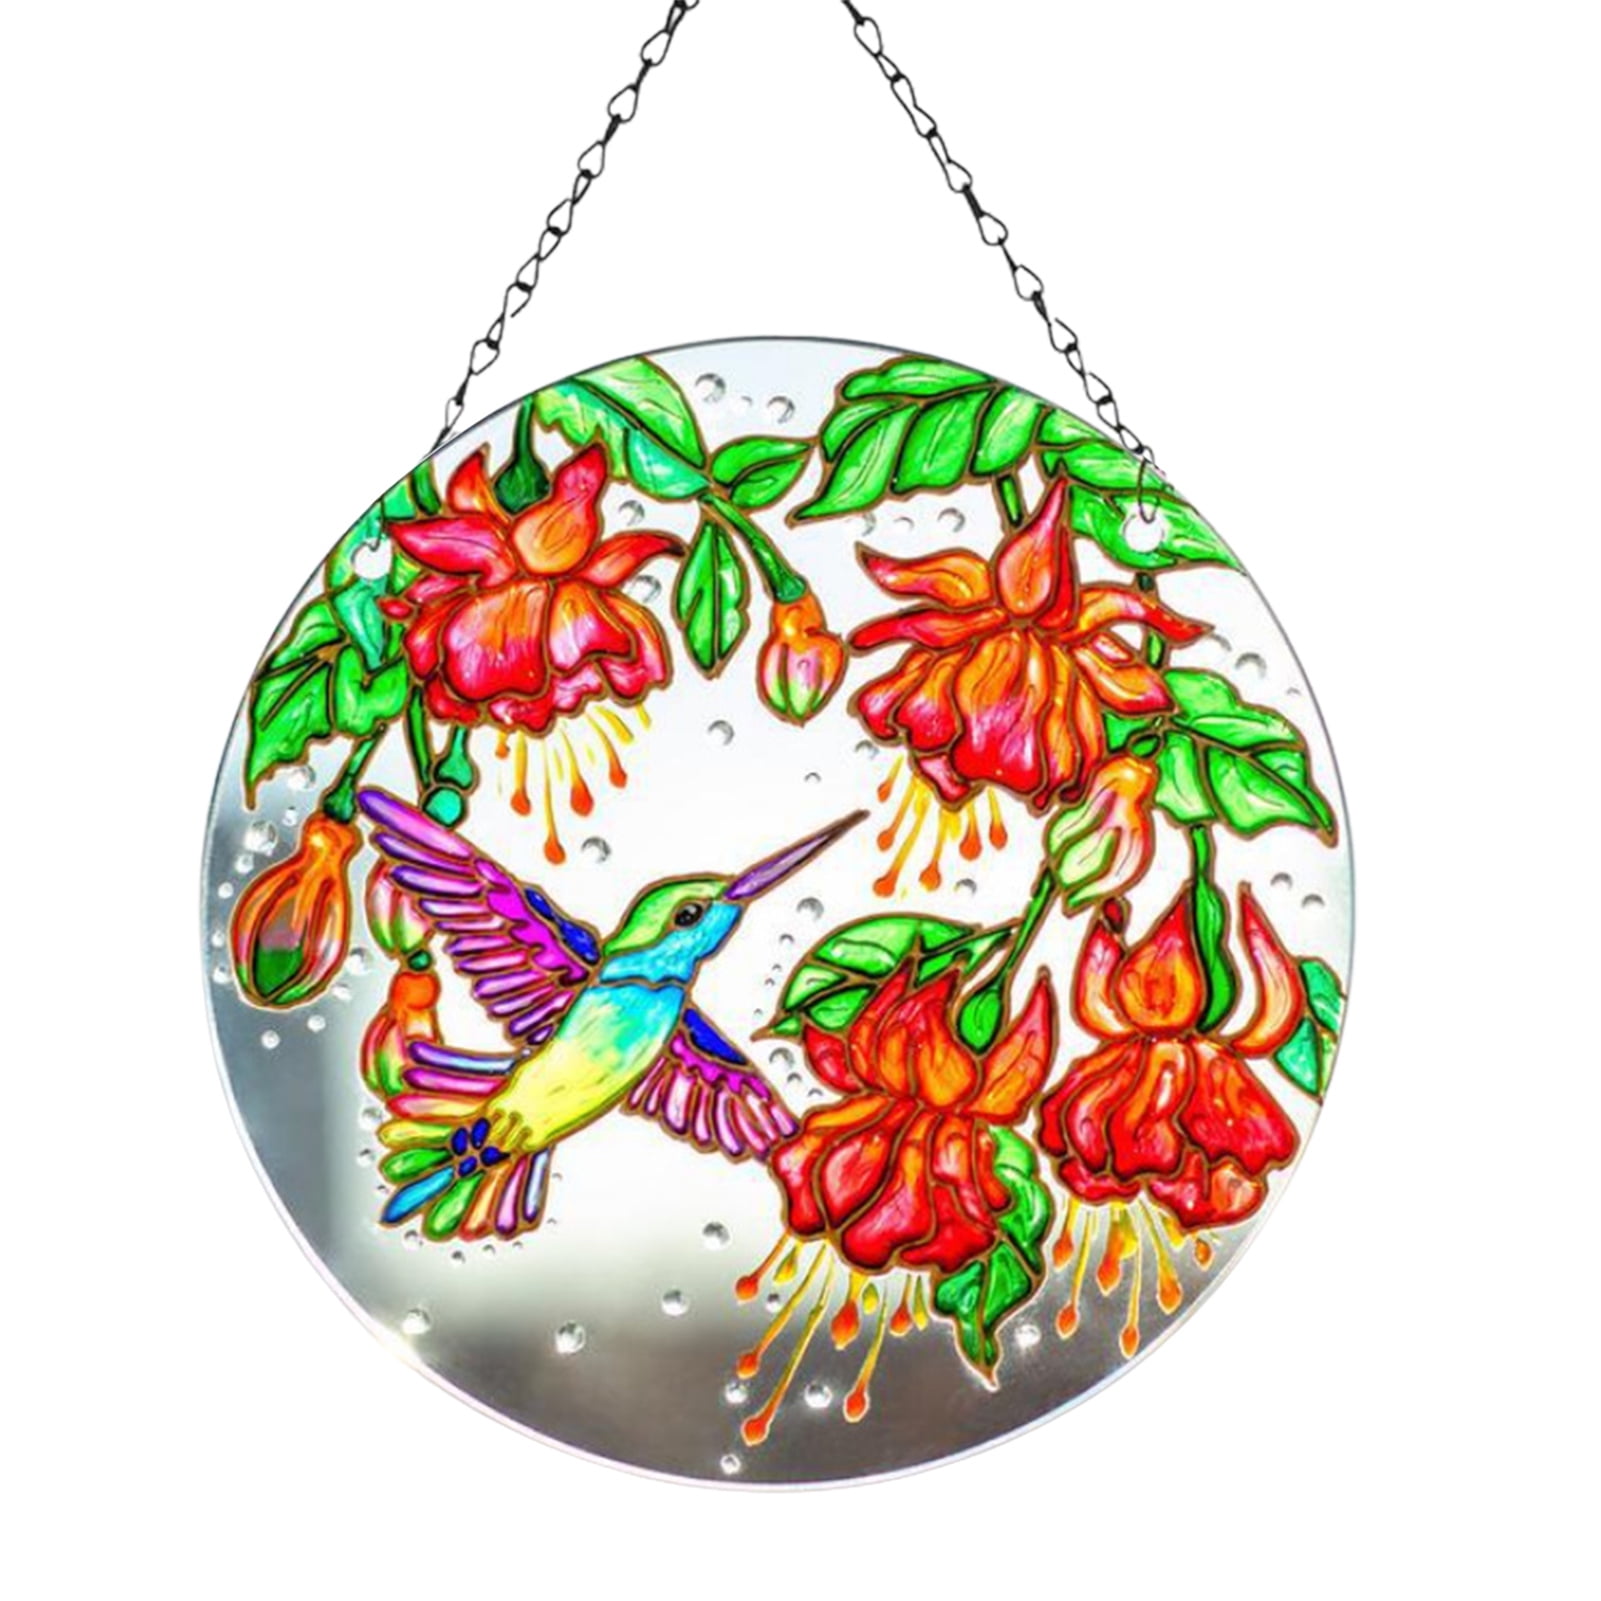 Colorful stained glass effect sun catcher mobile garden gifts Hummingbirds 